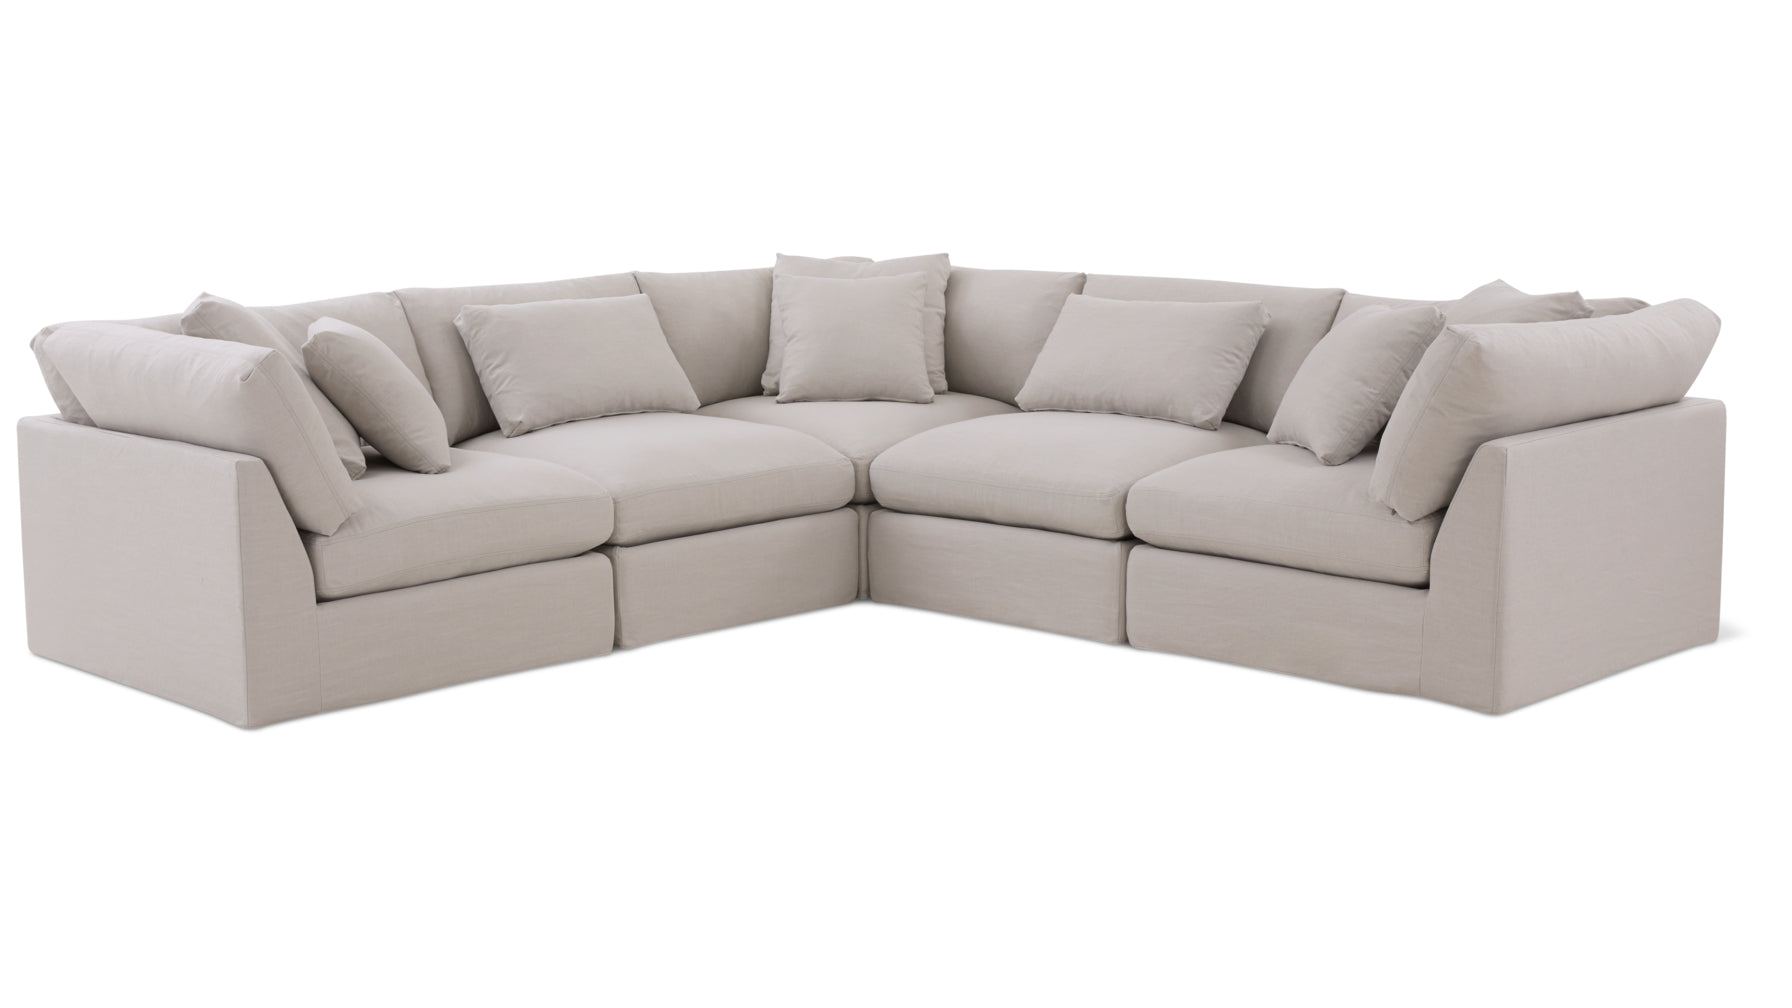 Get Together™ 5-Piece Modular Sectional Closed, Large, Clay - Image 2